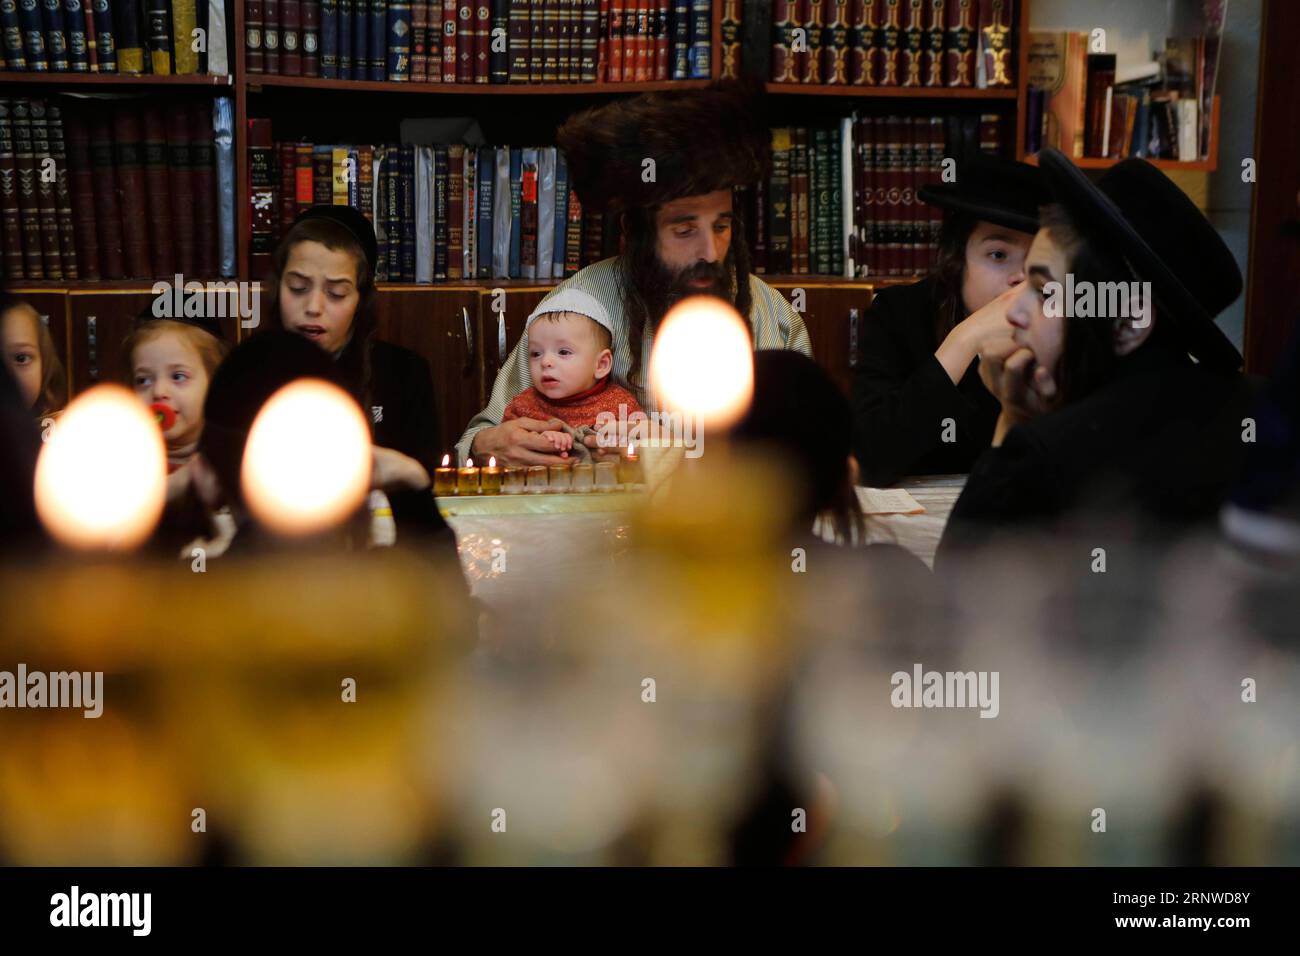 (171214) -- JERUSALEM, Dec. 14, 2017 -- Ultra-Orthodox Jews gather during Hanukkah in Mea Shearim neighborhood in Jerusalem, on Dec. 14, 2017. Hanukkah, also known as the Festival of Lights and Feast of Dedication, is an eight-day Jewish holiday commemorating the rededication of the Holy Temple (the Second Temple) in Jerusalem at the time of the Maccabean Revolt against the Seleucid Empire of the 2nd Century B.C. ) MIDEAST-JERUSALEM-HANUKKAH GilxCohenxMagen PUBLICATIONxNOTxINxCHN Stock Photo